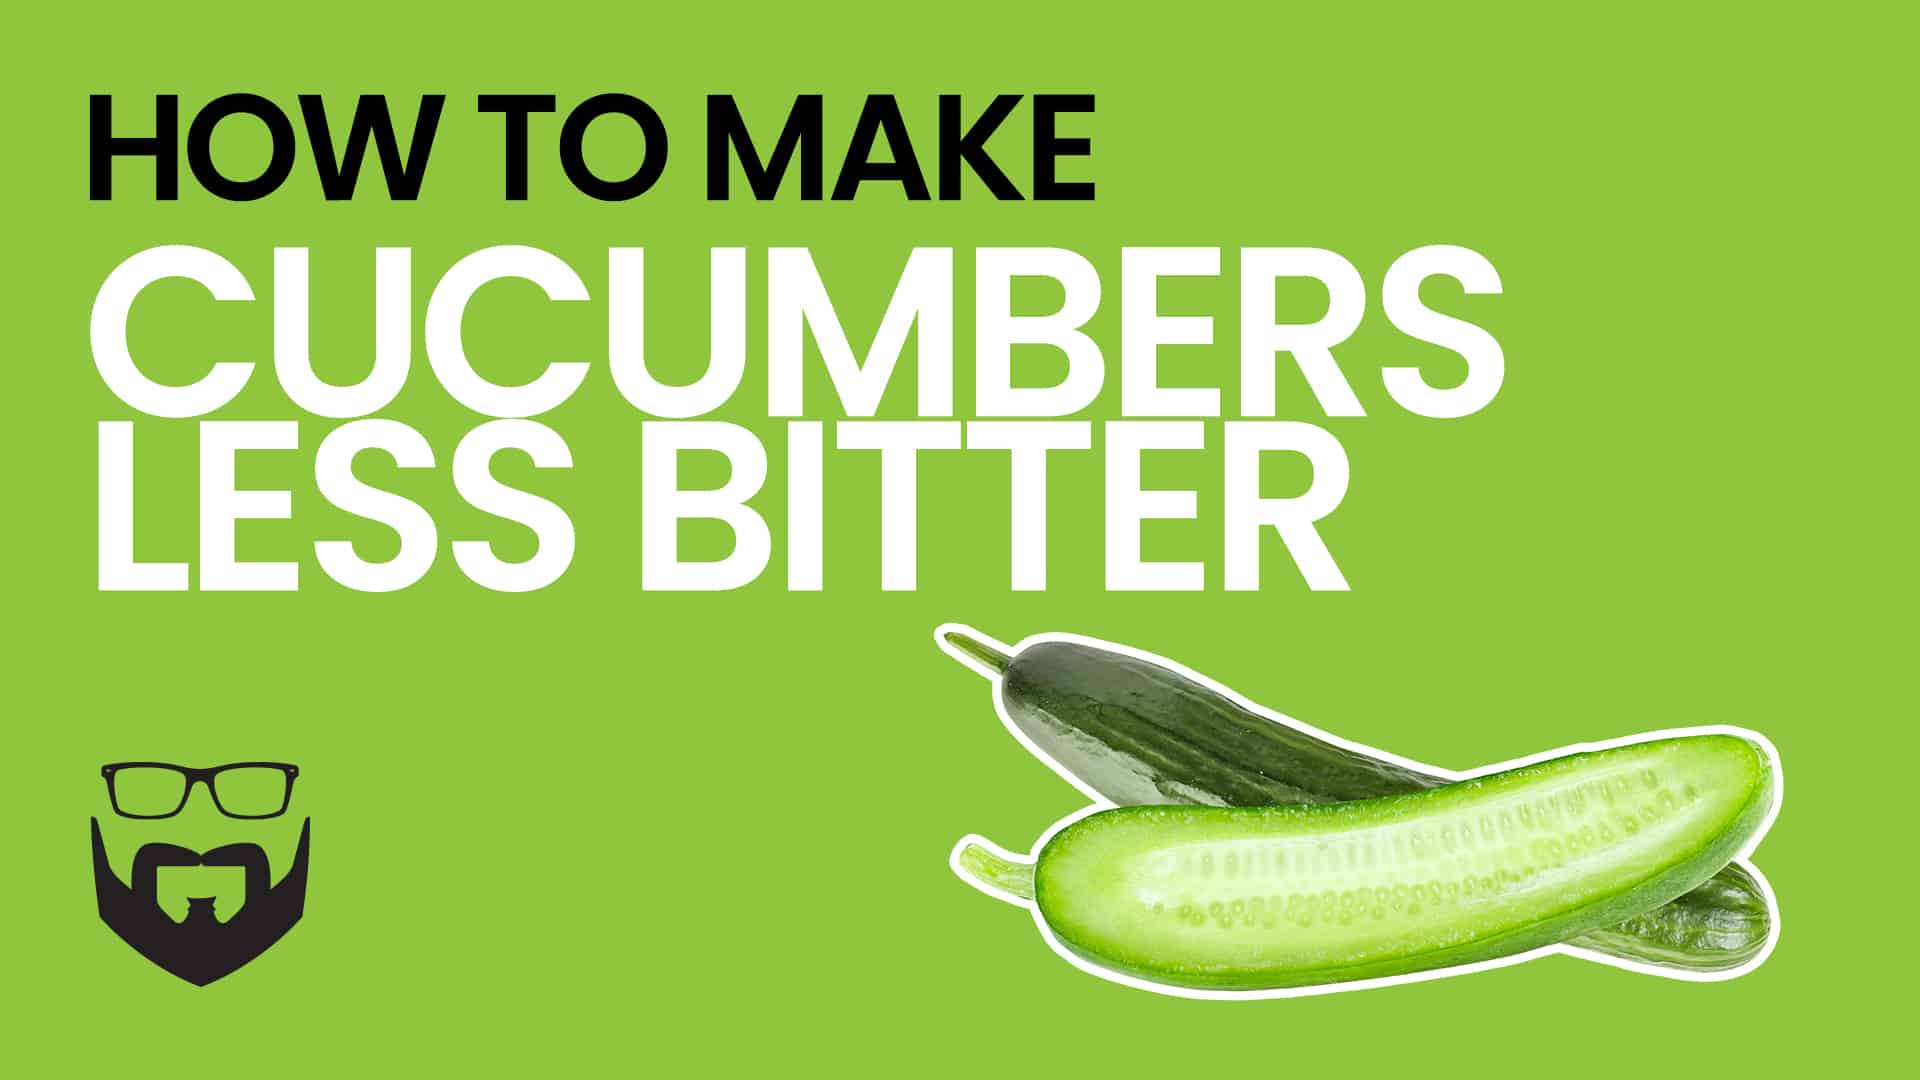 This Food Hack Makes Cucumbers Less Bitter Video - Green